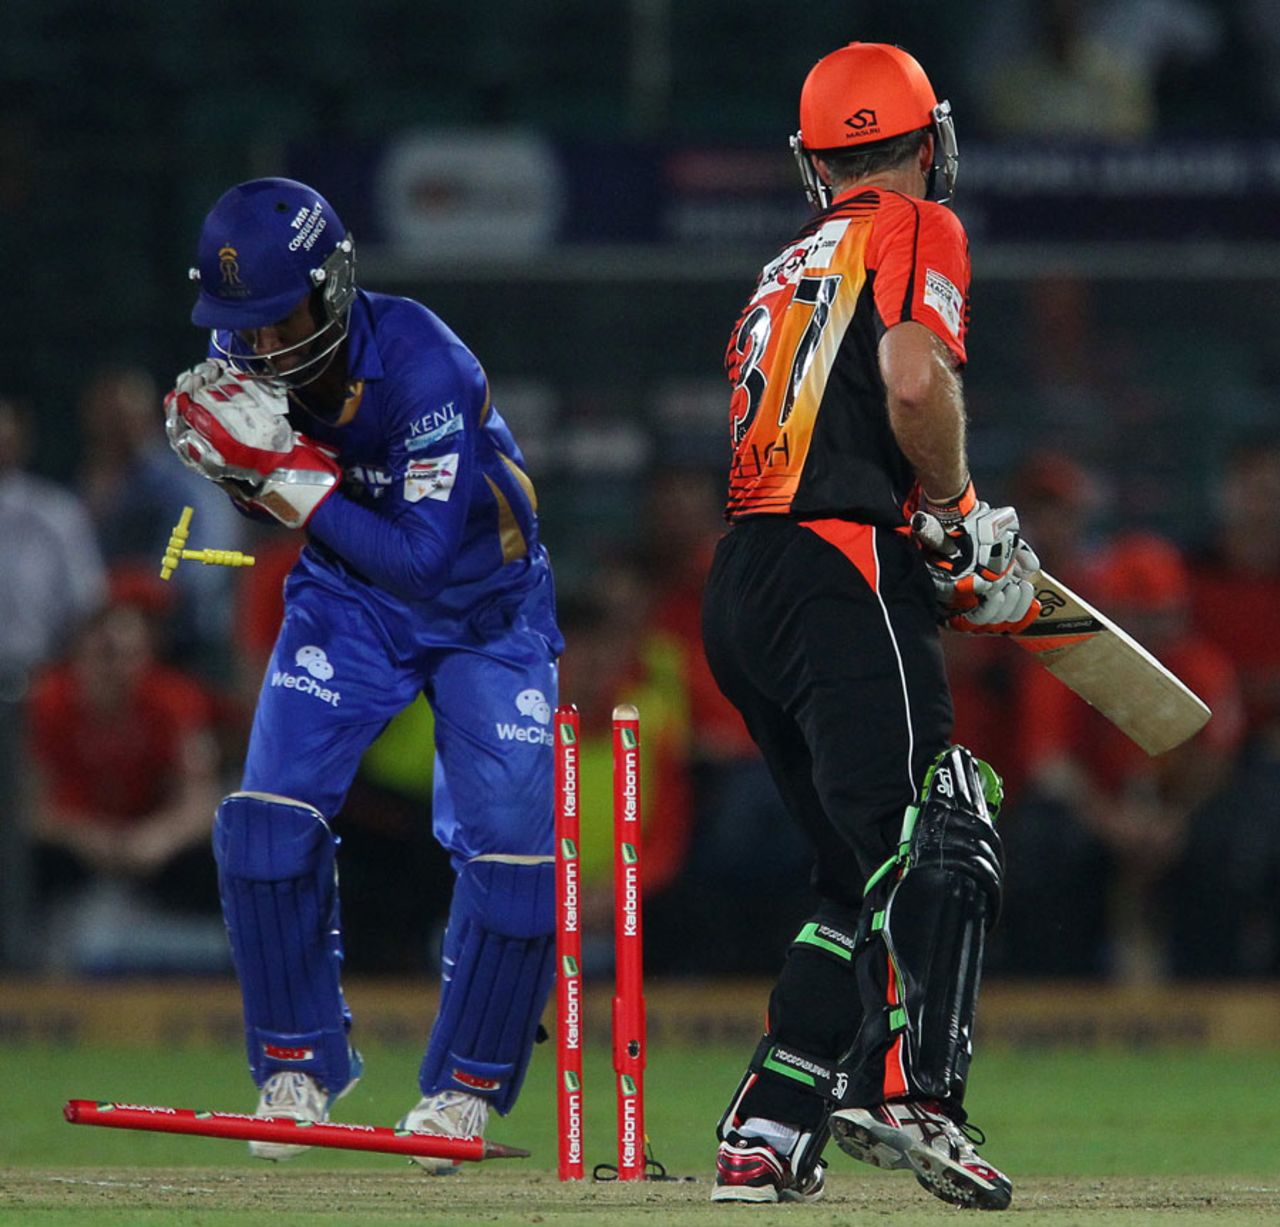 Sanju Samson whips the bails as Simon Katich looks on, Perth Scorchers v Rajasthan Royals, Group A, Champions League 2013, Jaipur, September 29, 2013